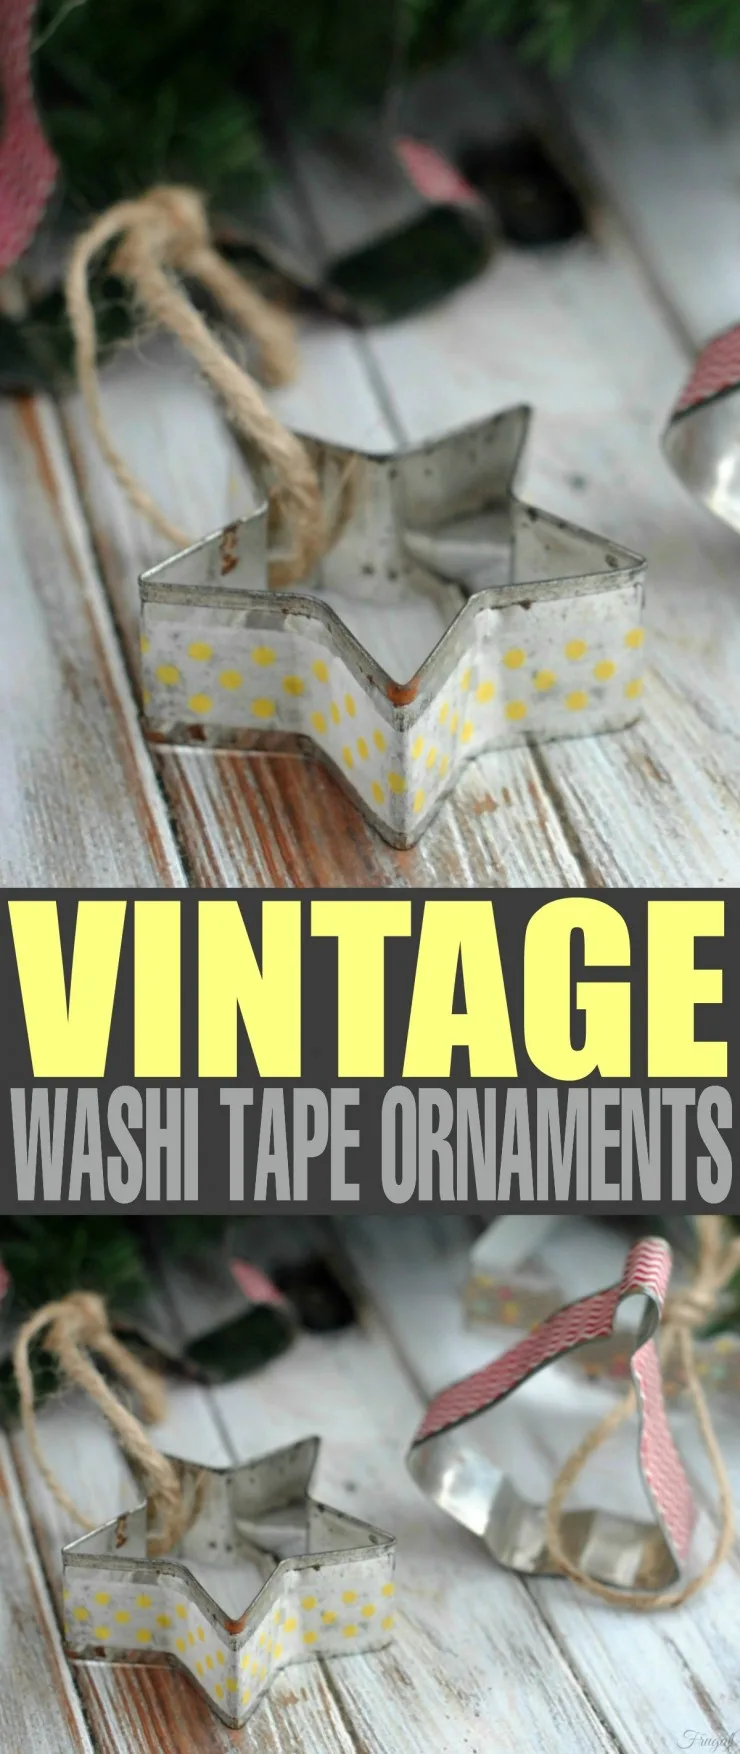 These Vintage Washi Tape Ornaments are a great diy Christmas idea. If you are looking for easy crafts with a tutorial check this out.